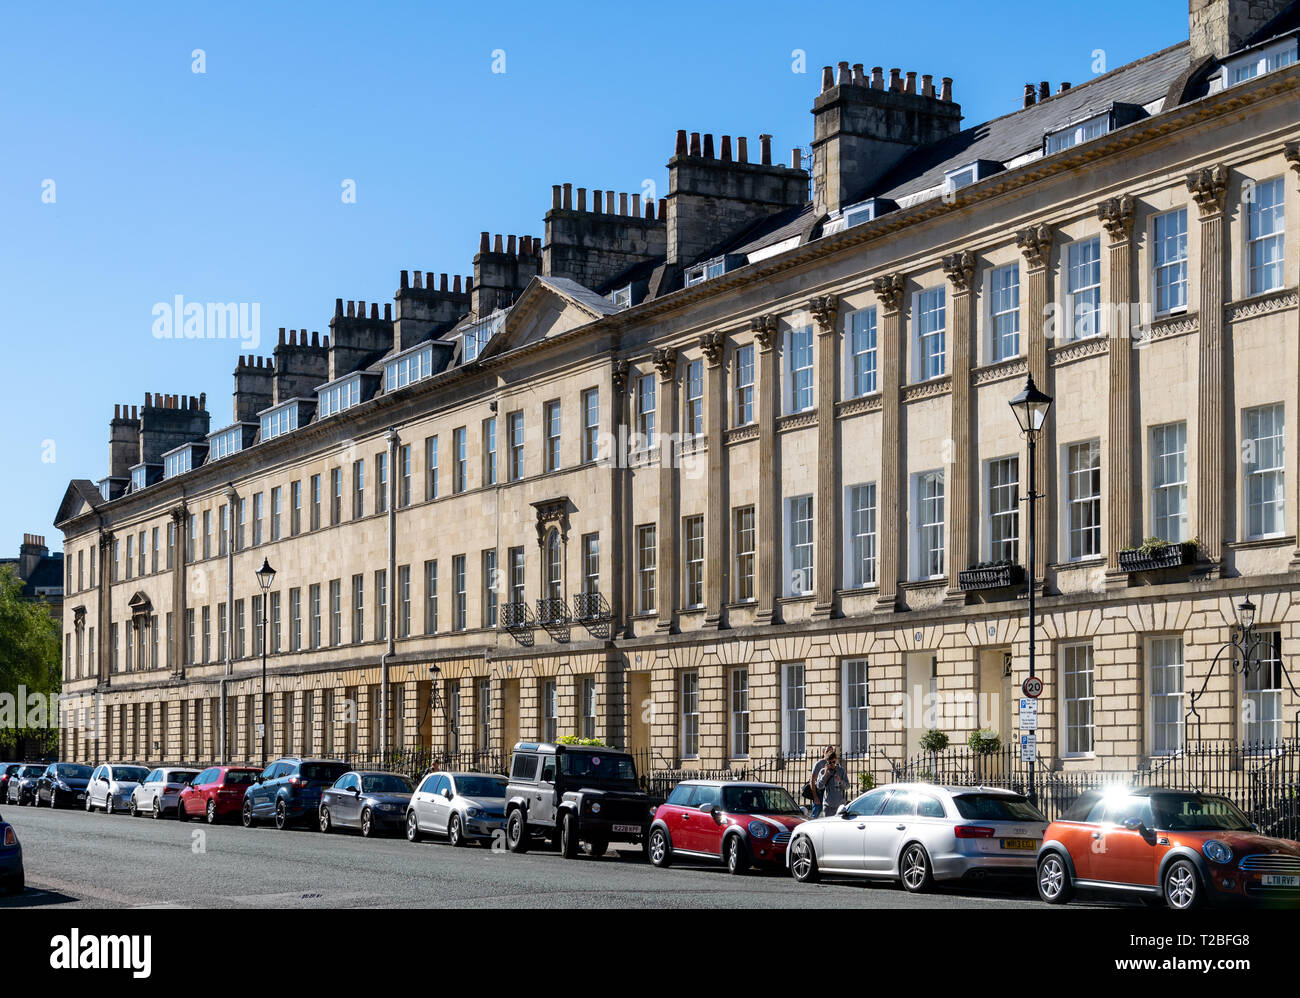 A view along Great Pulteney Street in sunshine, Bath, England Stock Photo